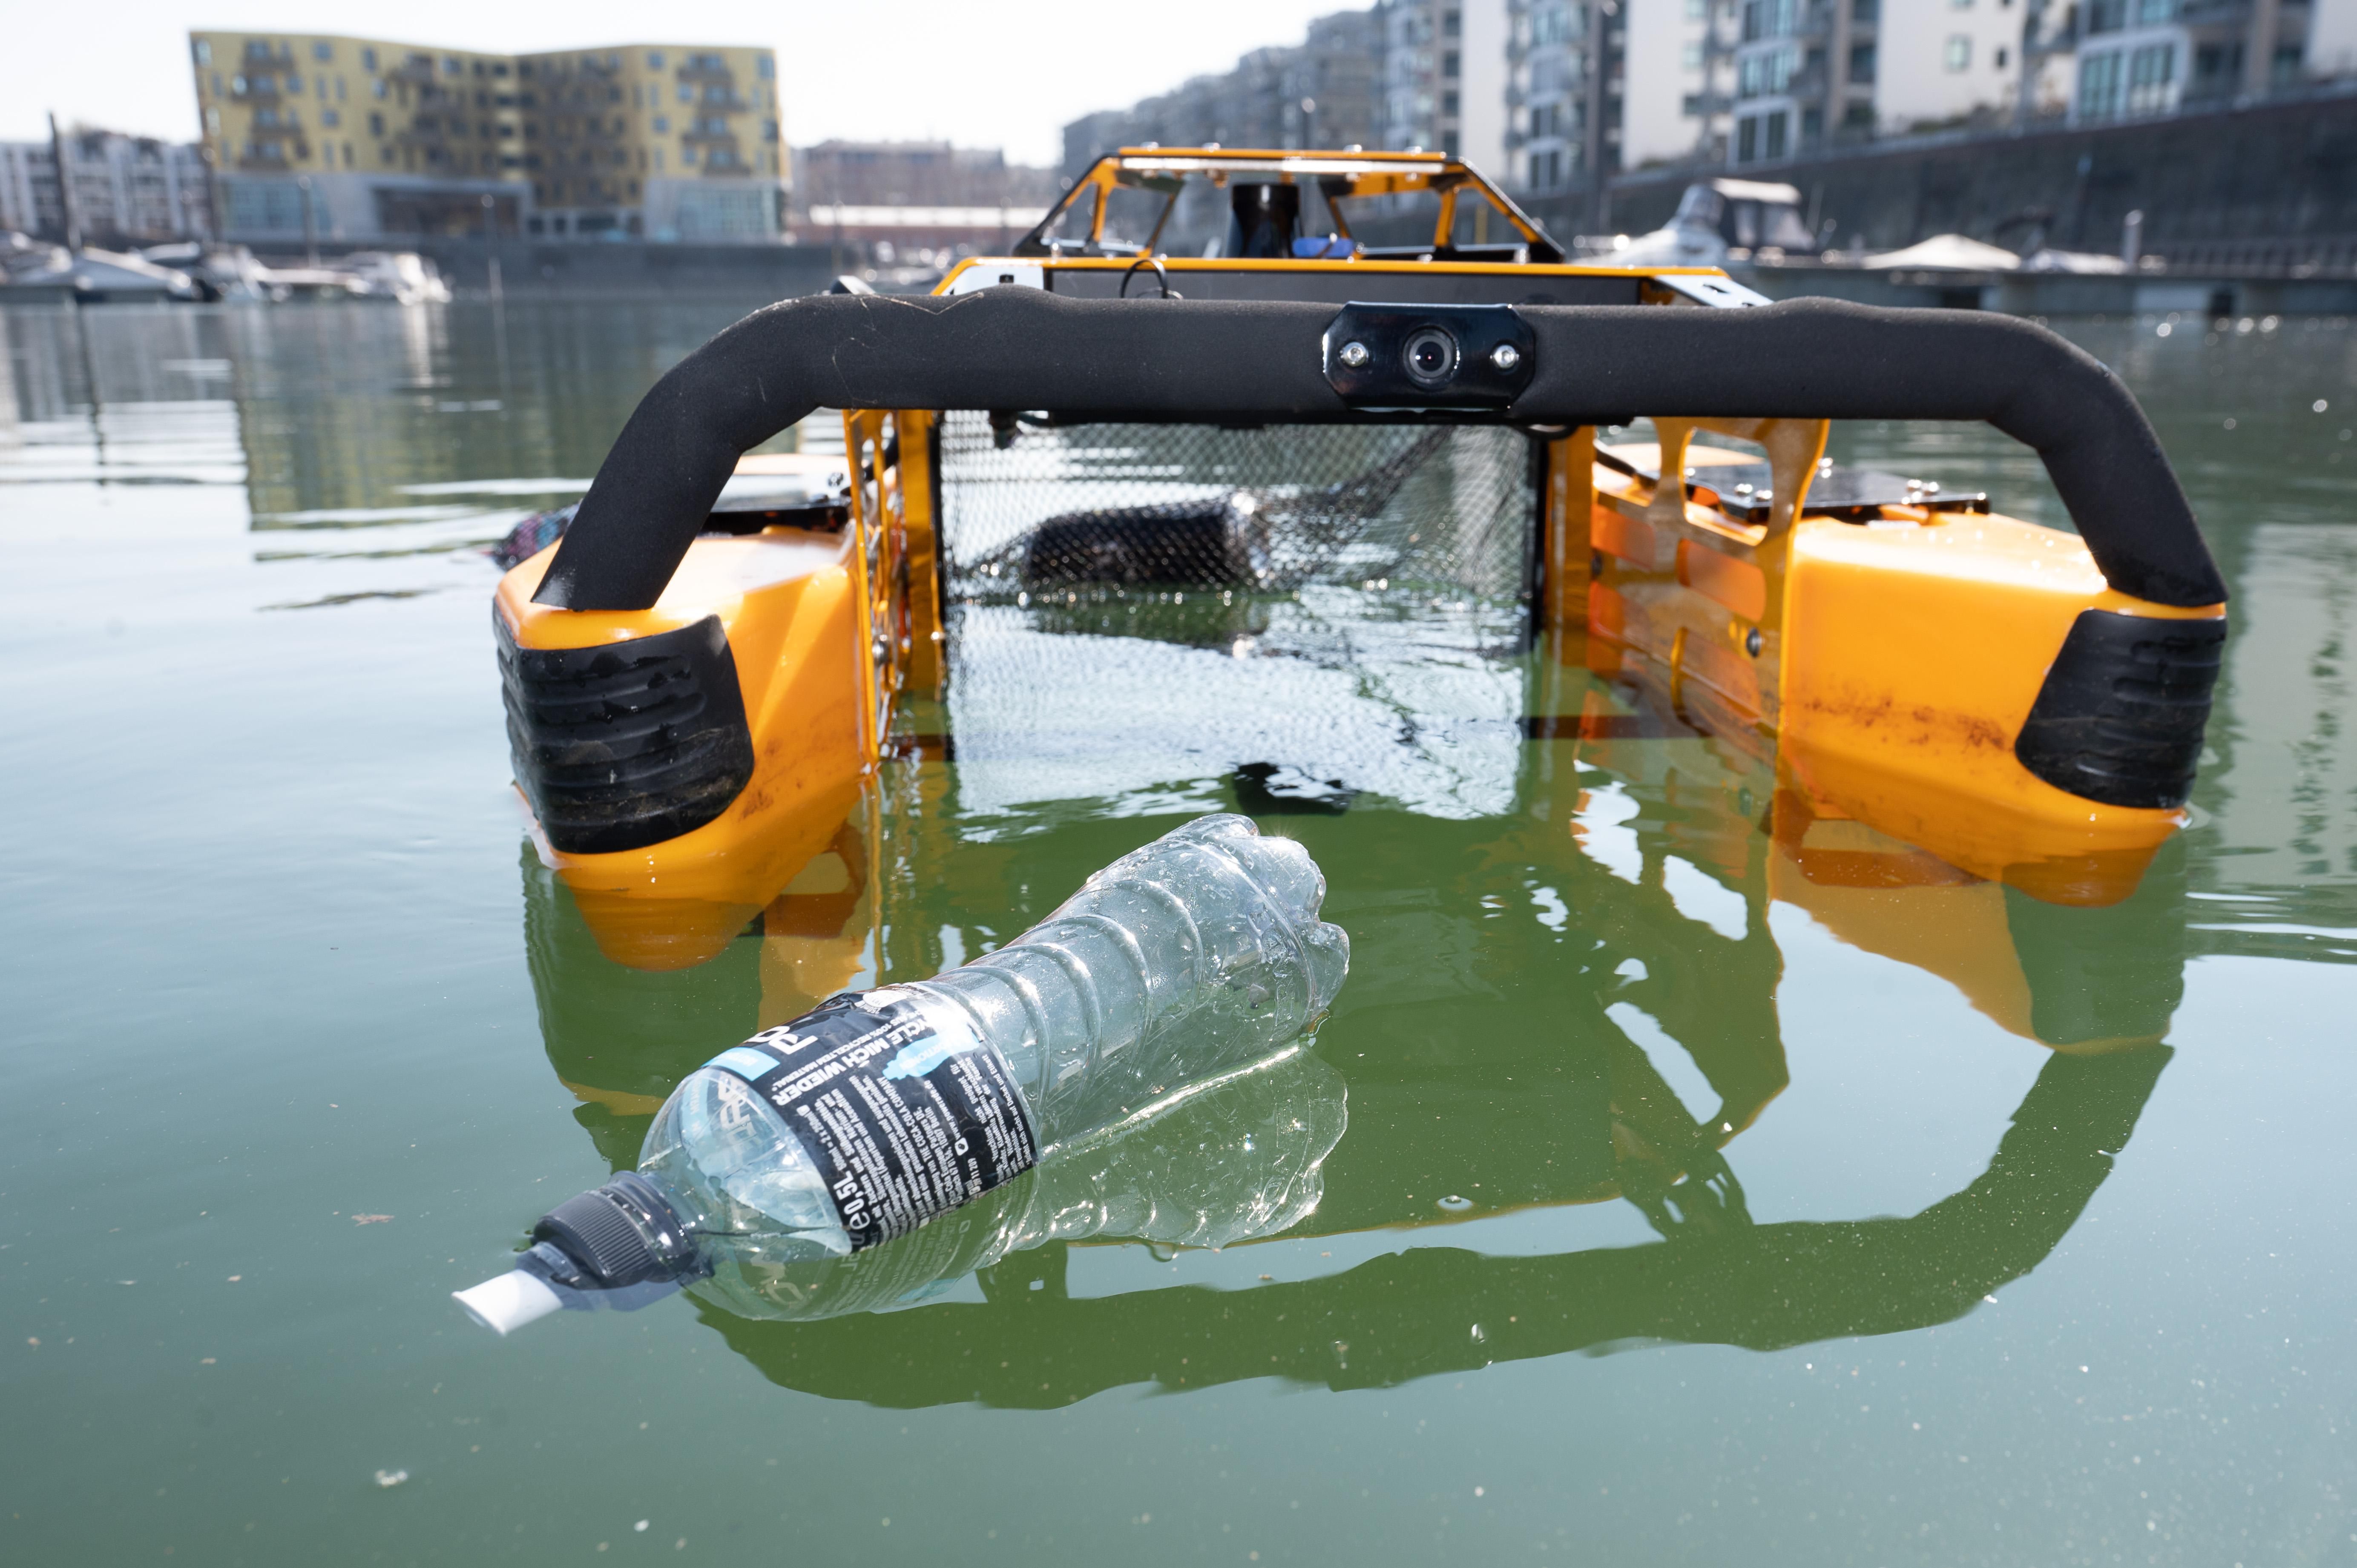 A yellow floating robot prepares to collect a plastic water bottle at the Marina Zollhafen. Zollhafen is located at the portion of the Rhine River that runs past the city of Mainz, Germany.